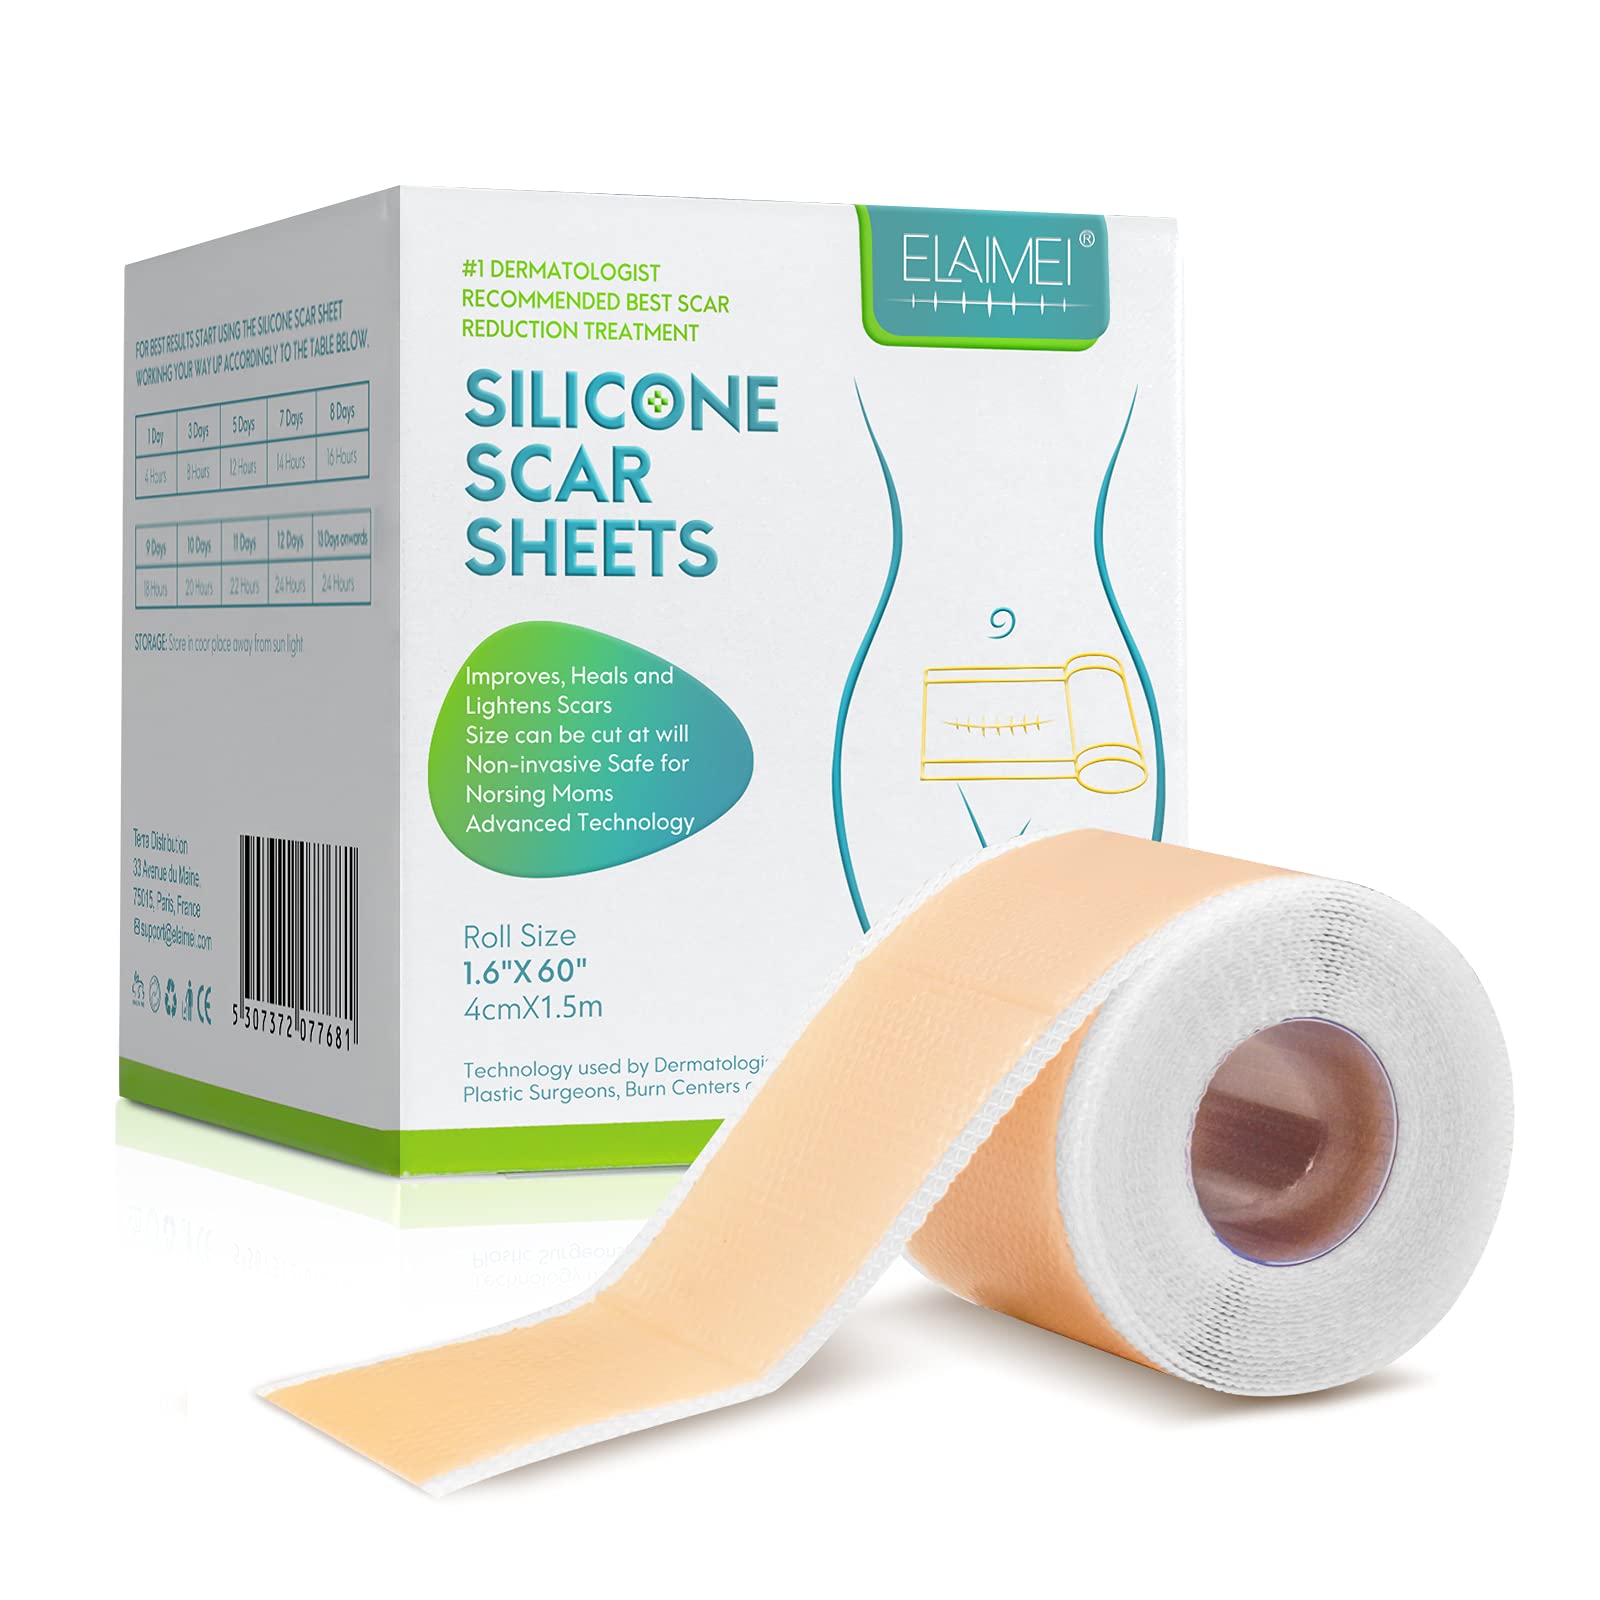 Silicone Scar Sheets, Medical Silicone Easy-Tear Gel Tape Roll, Scar Removal Sheets Works on Old & New Scars, Scar Treatment Sheets